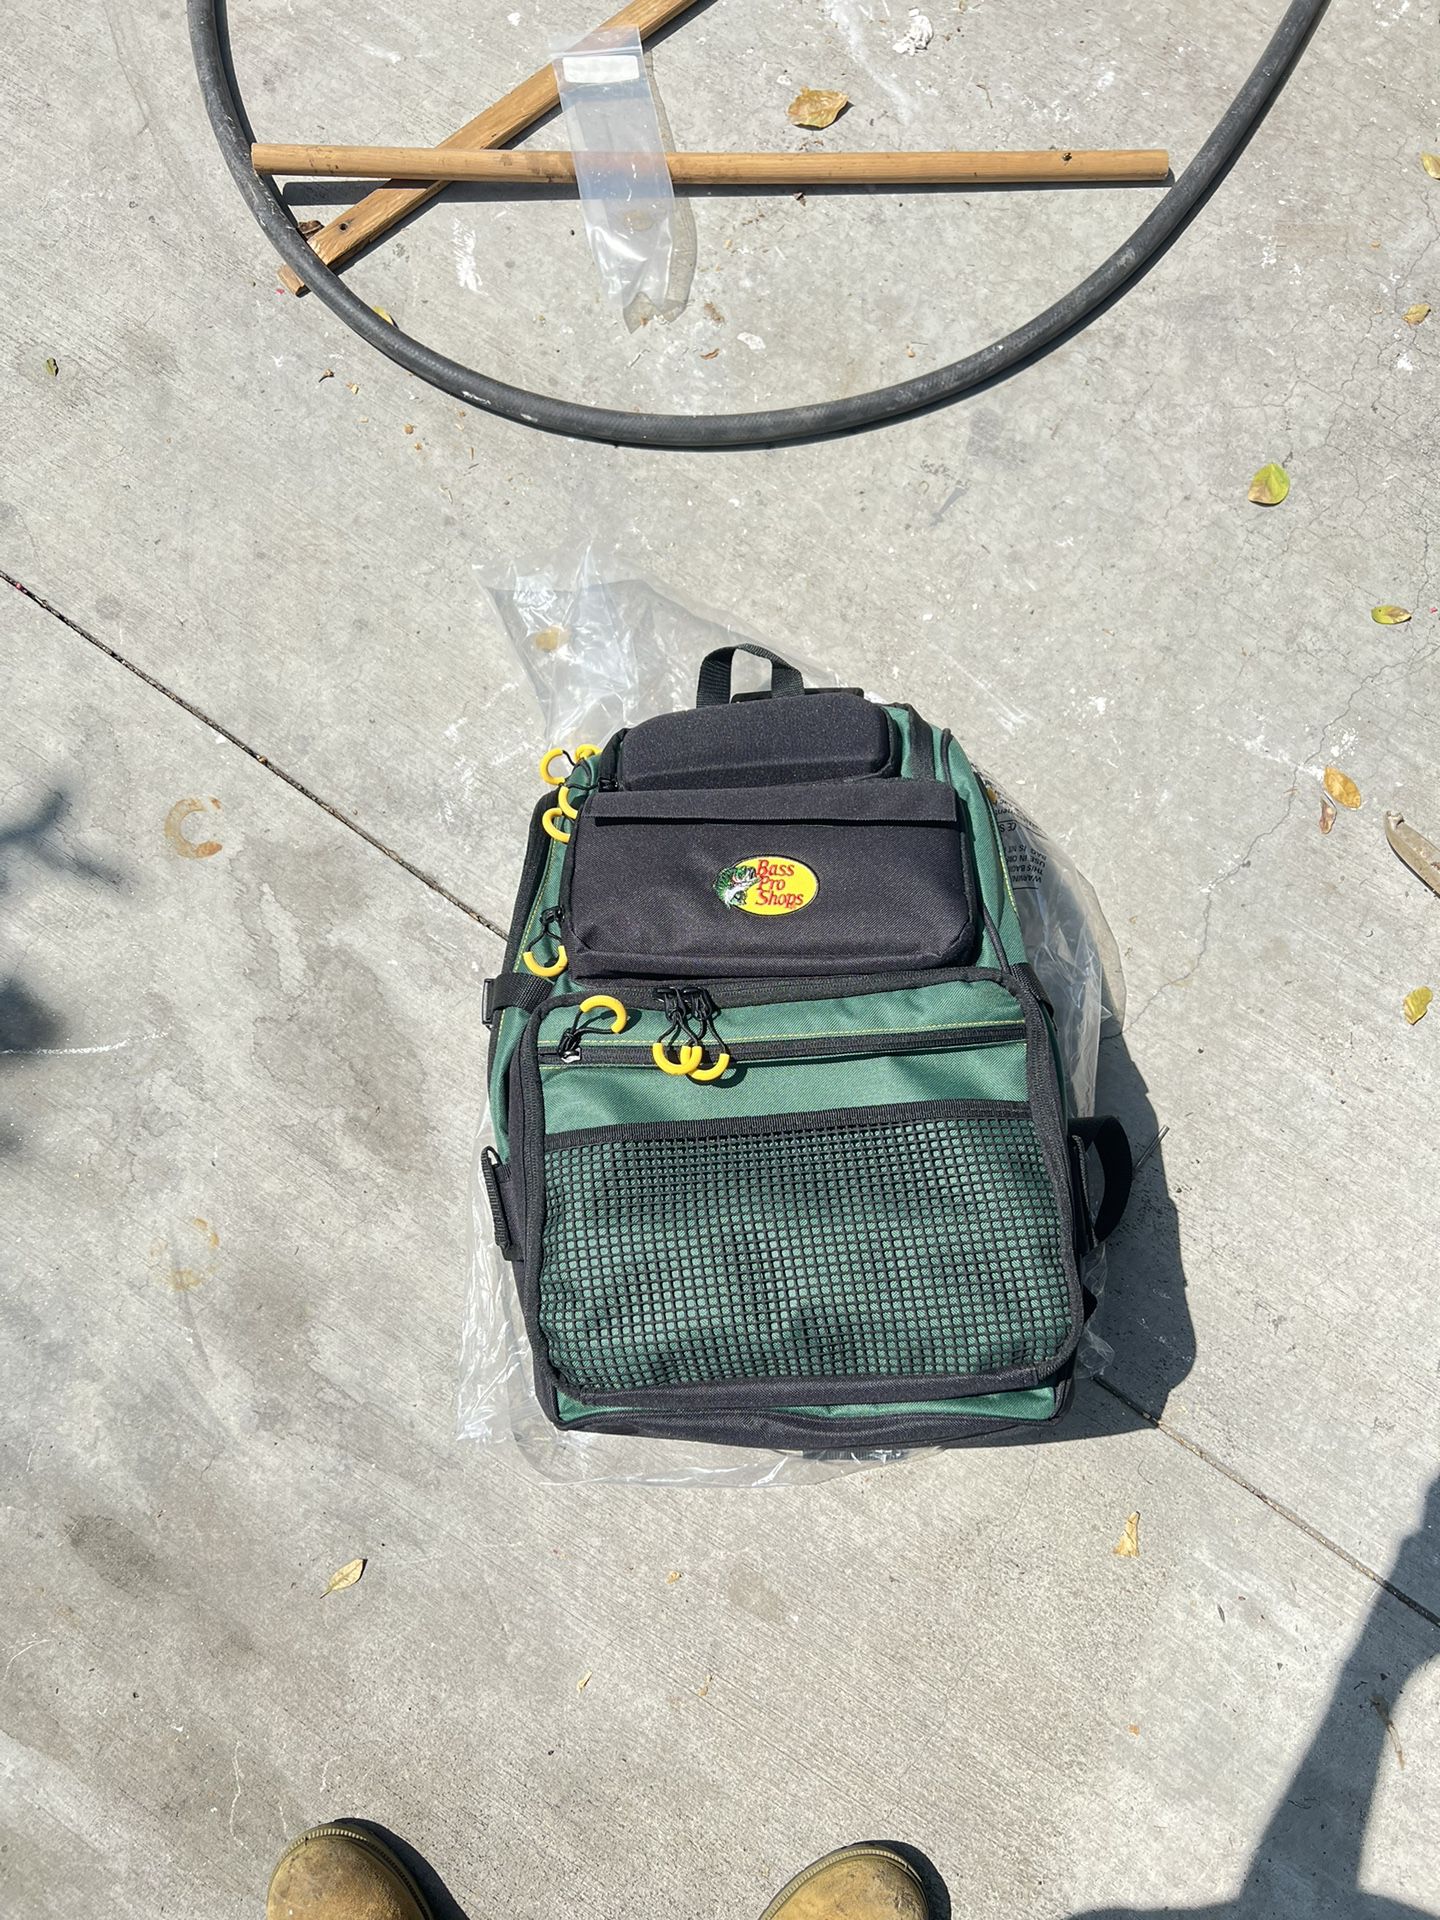 Bass pro shop Fishing Backpack for Sale in City Of Industry, CA - OfferUp